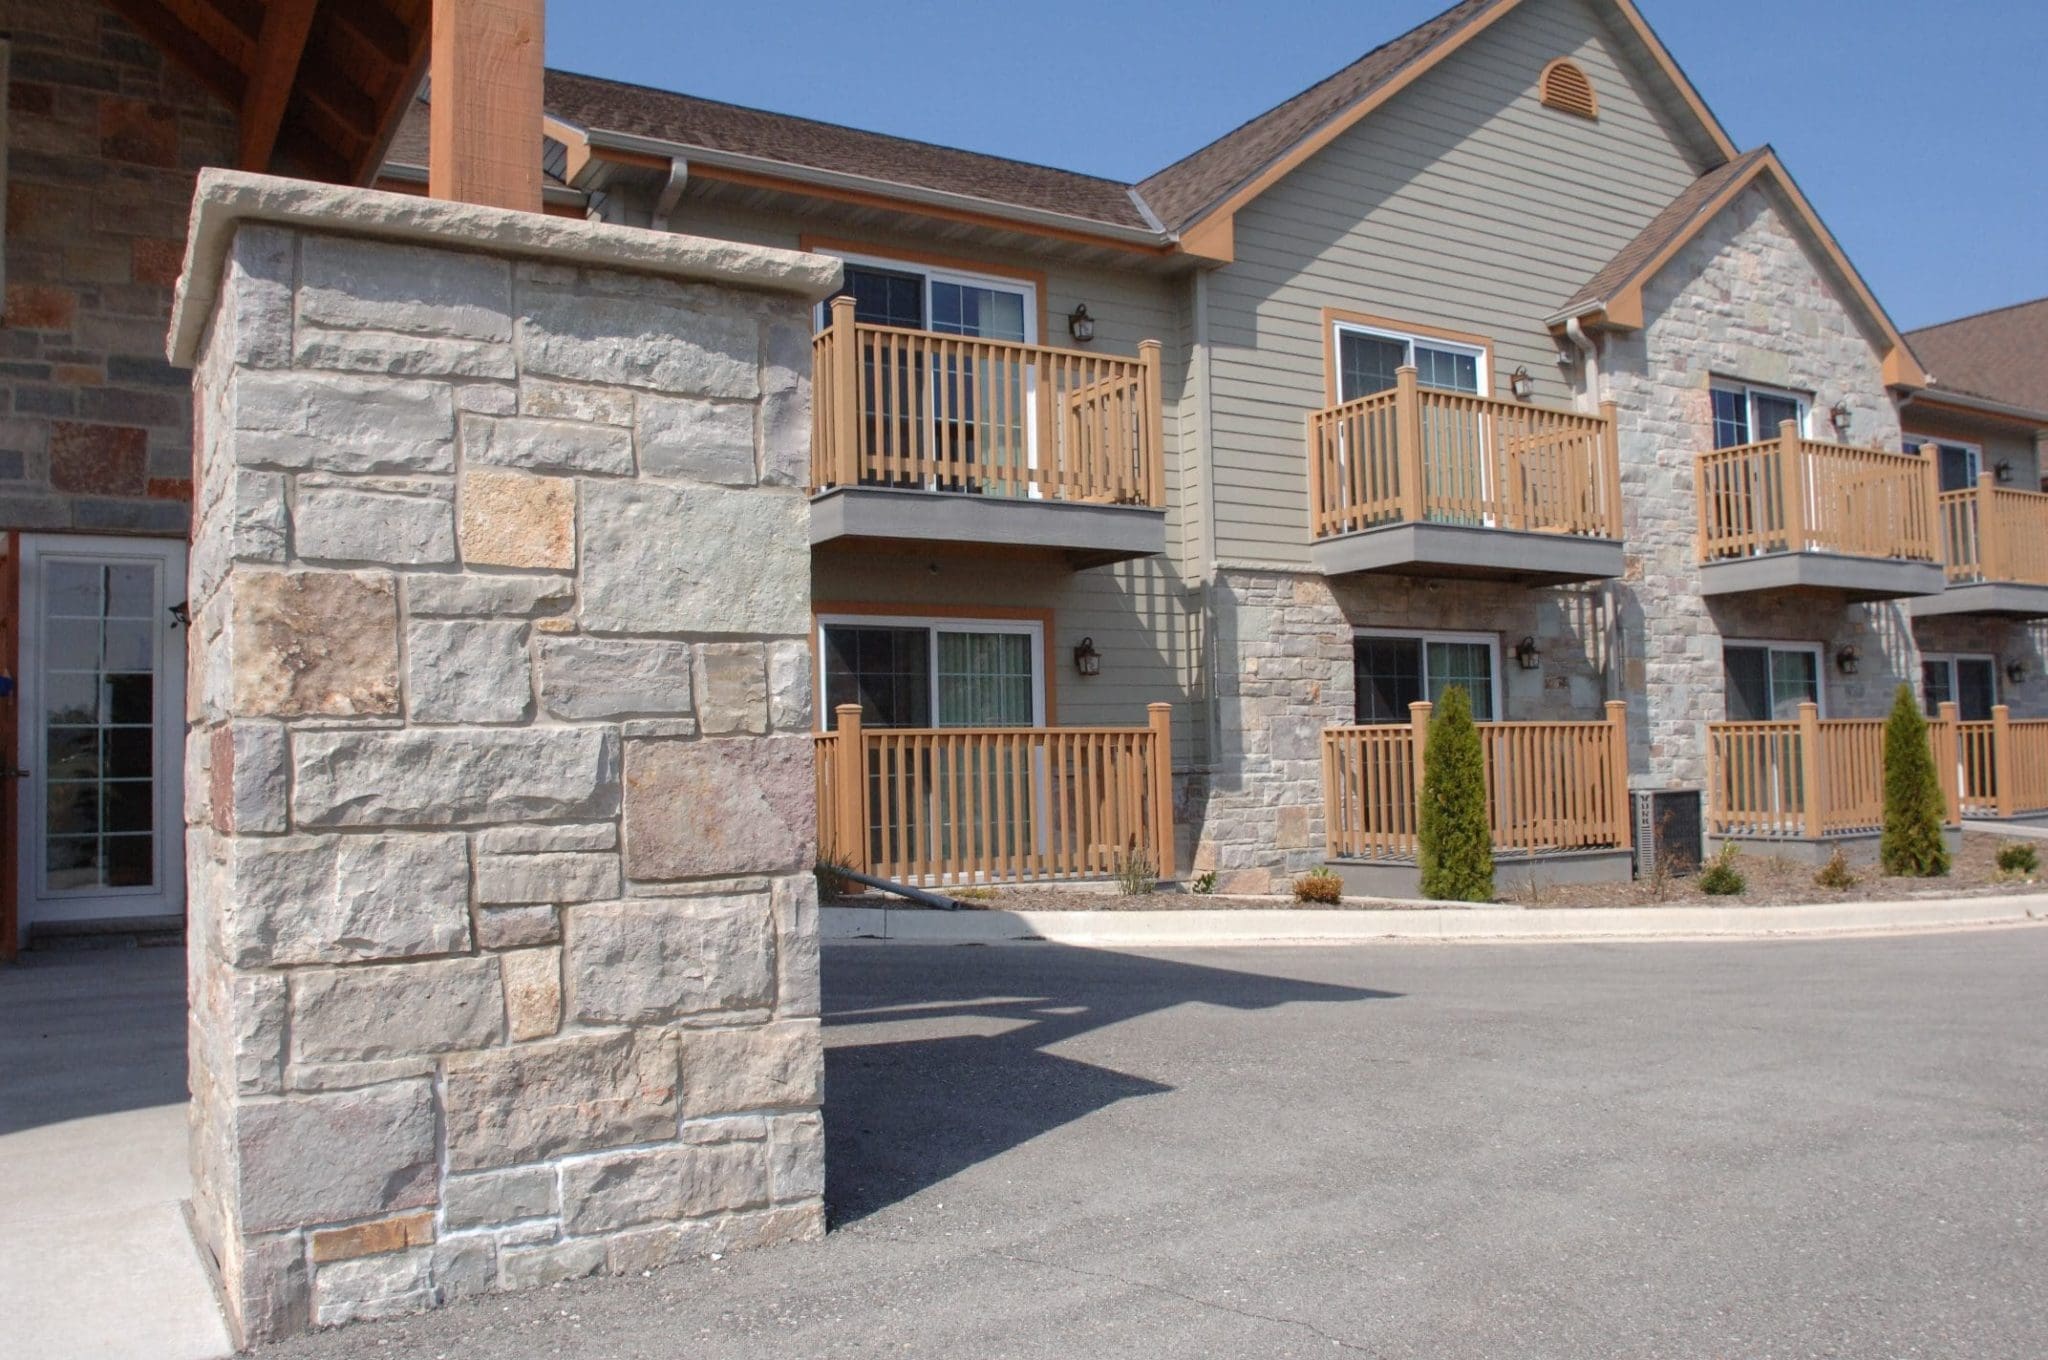 Apartment Complex with Avondale Real Stone Veneer Siding